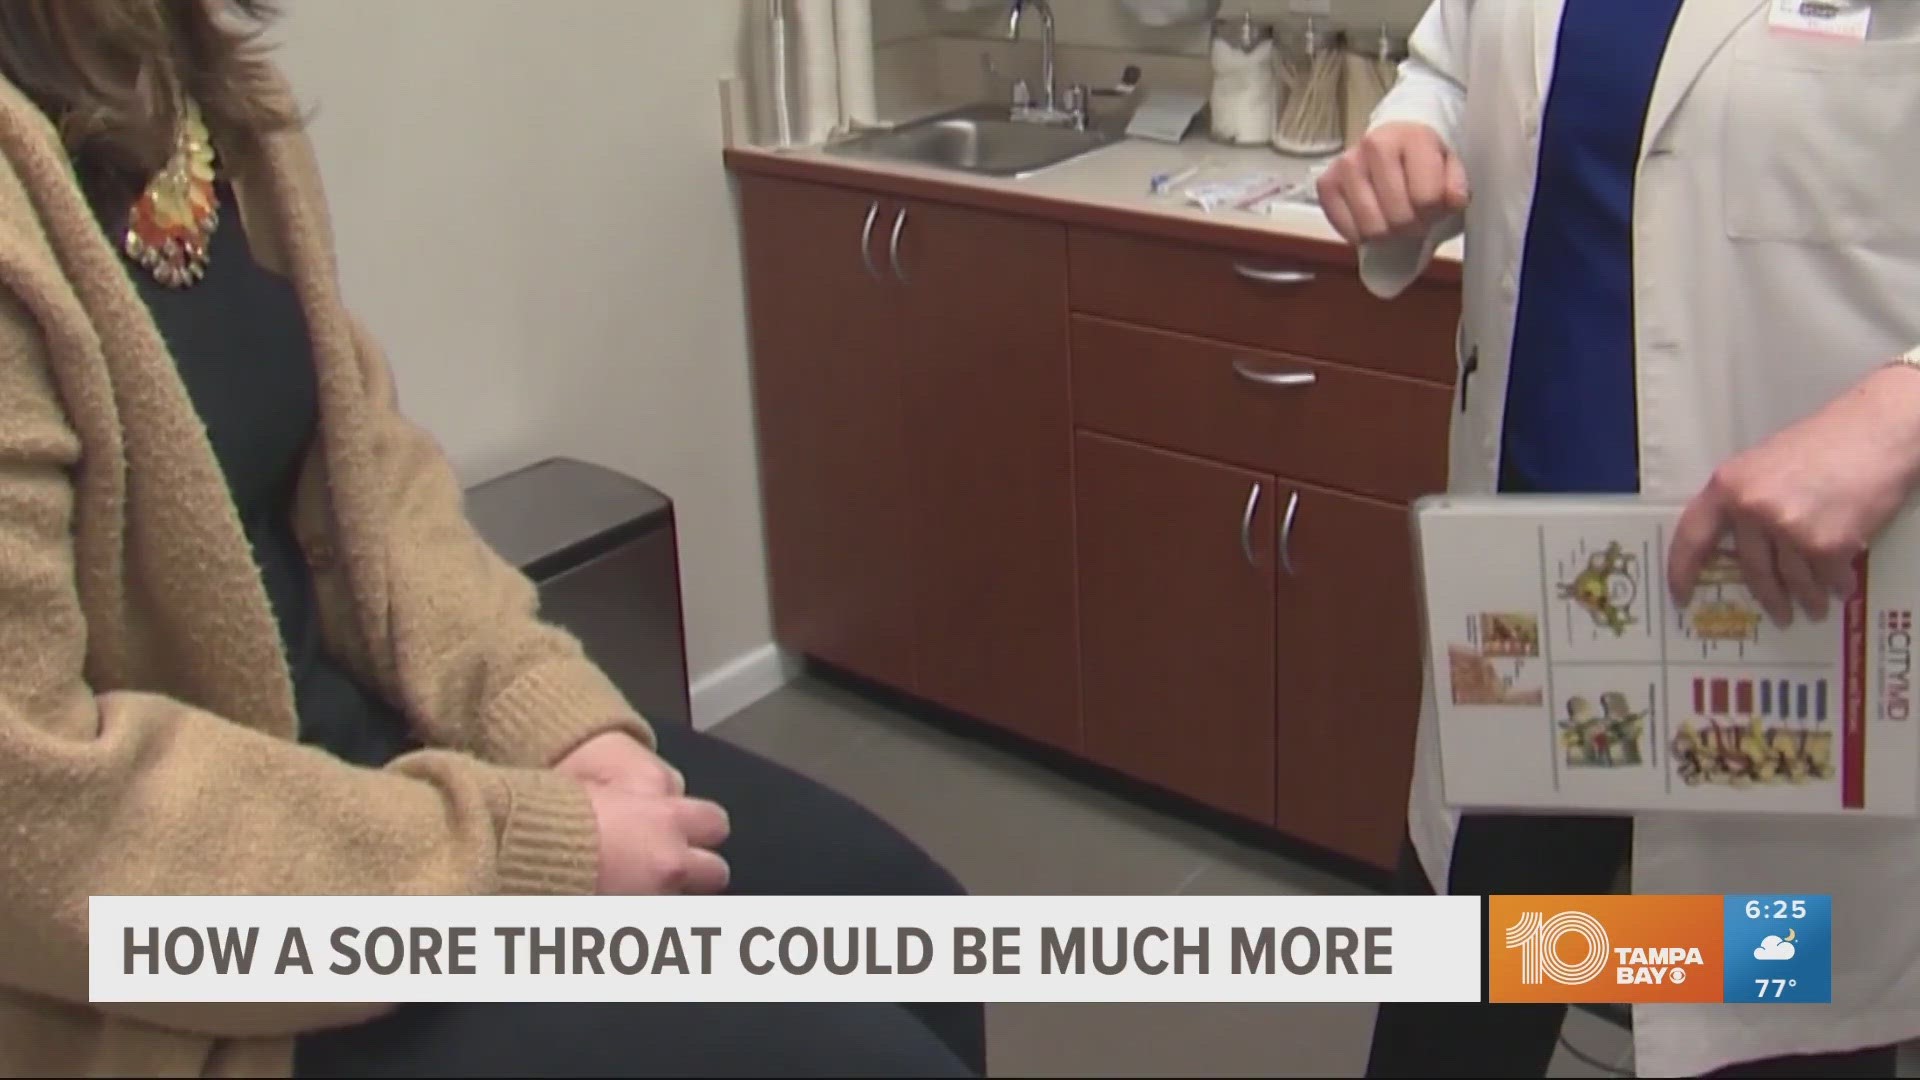 An ongoing sore throat could be a sign of head or neck cancer.